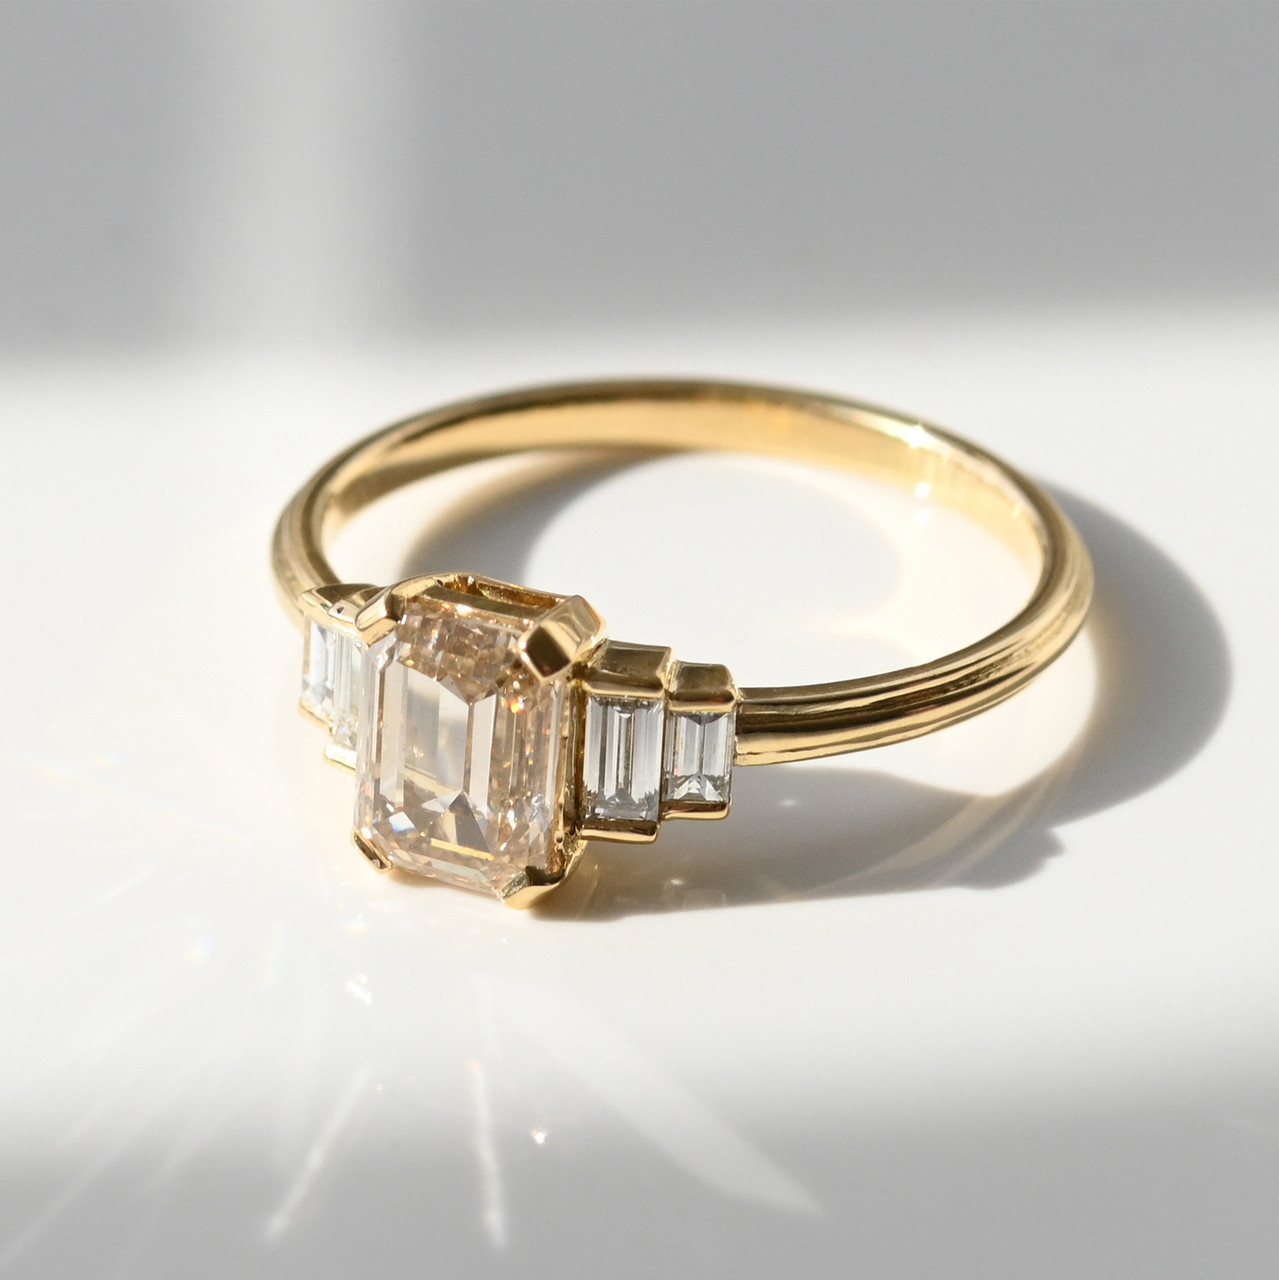 Champagne Empire Five Step Diamond Ring, tf House - Art Echo, tomfoolery